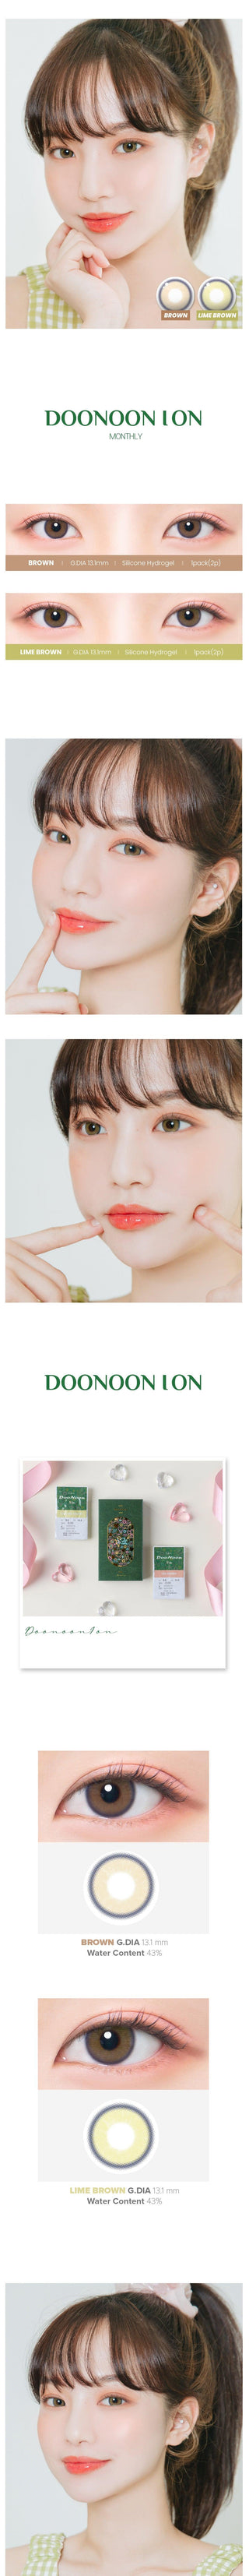 Variety of DooNoon I On Brown contact lens colors displayed, with closeups of an eye wearing the contact lens colors, and with a model wearing the contact lens colors showing realistic eye-enlarging effect from various angles.